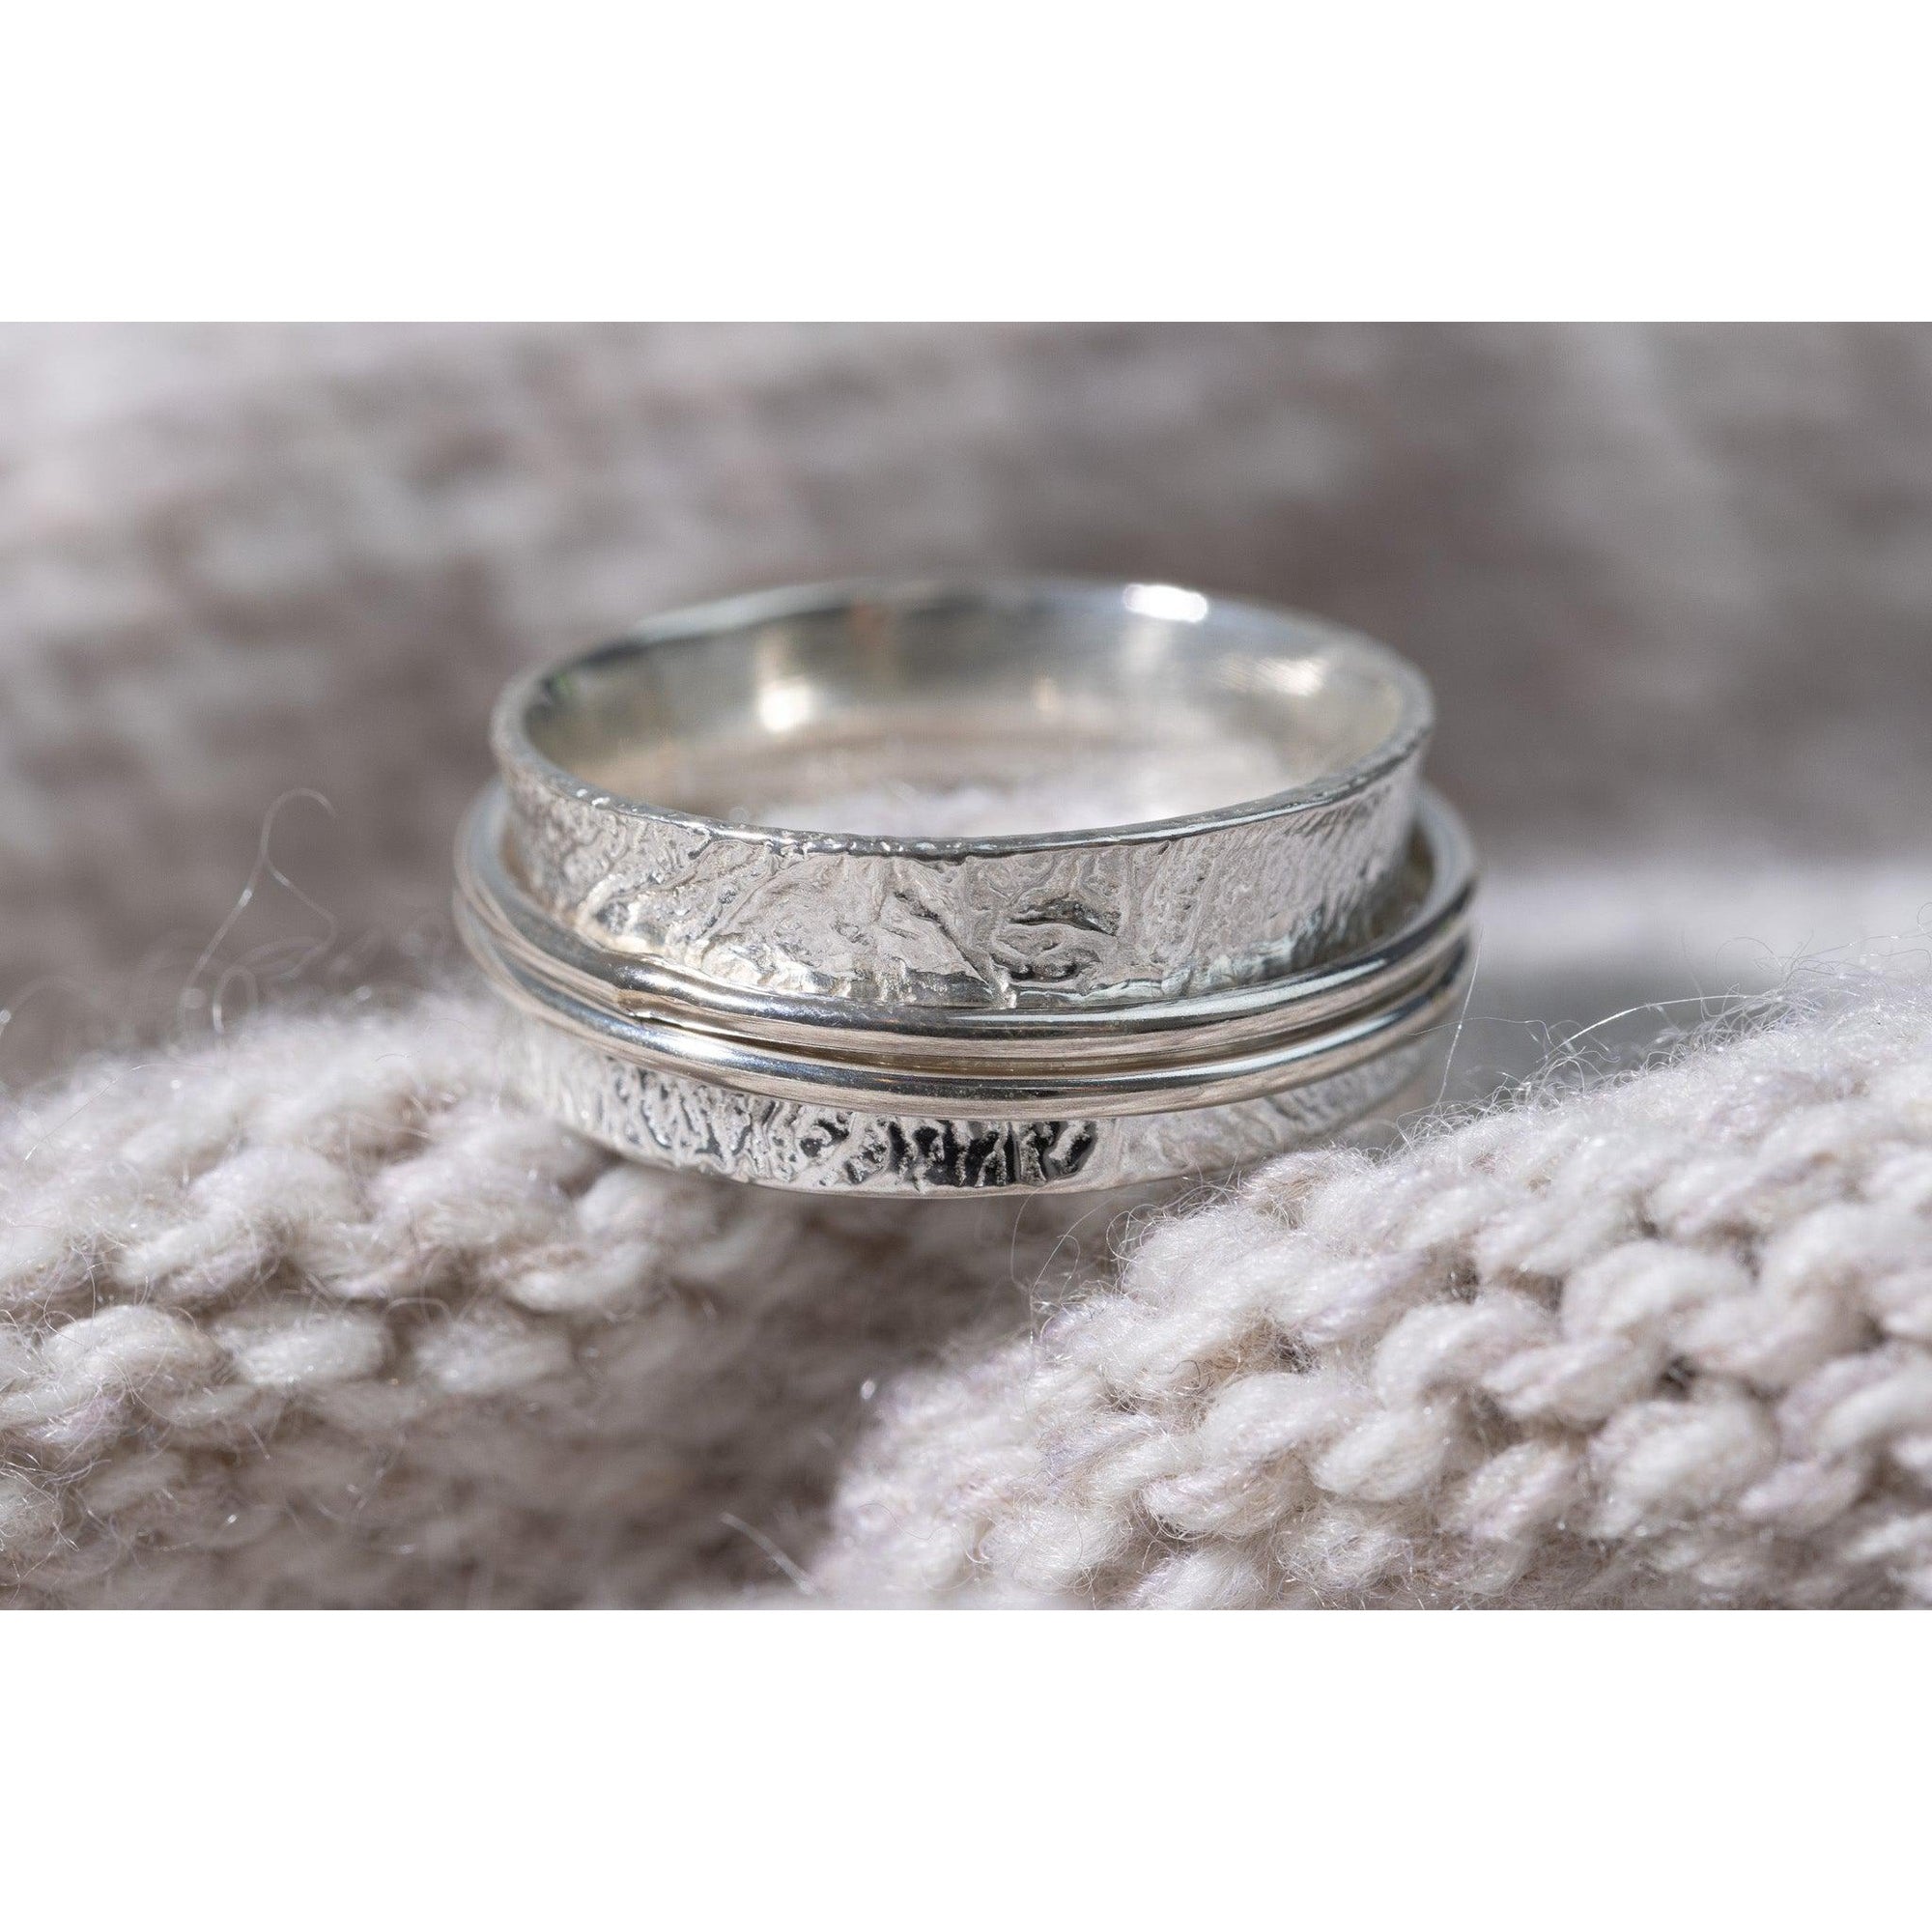 'LG52 - Silver Double 'Worry' Ring' by Les Grimshaw, available at Padstow Gallery, Cornwall